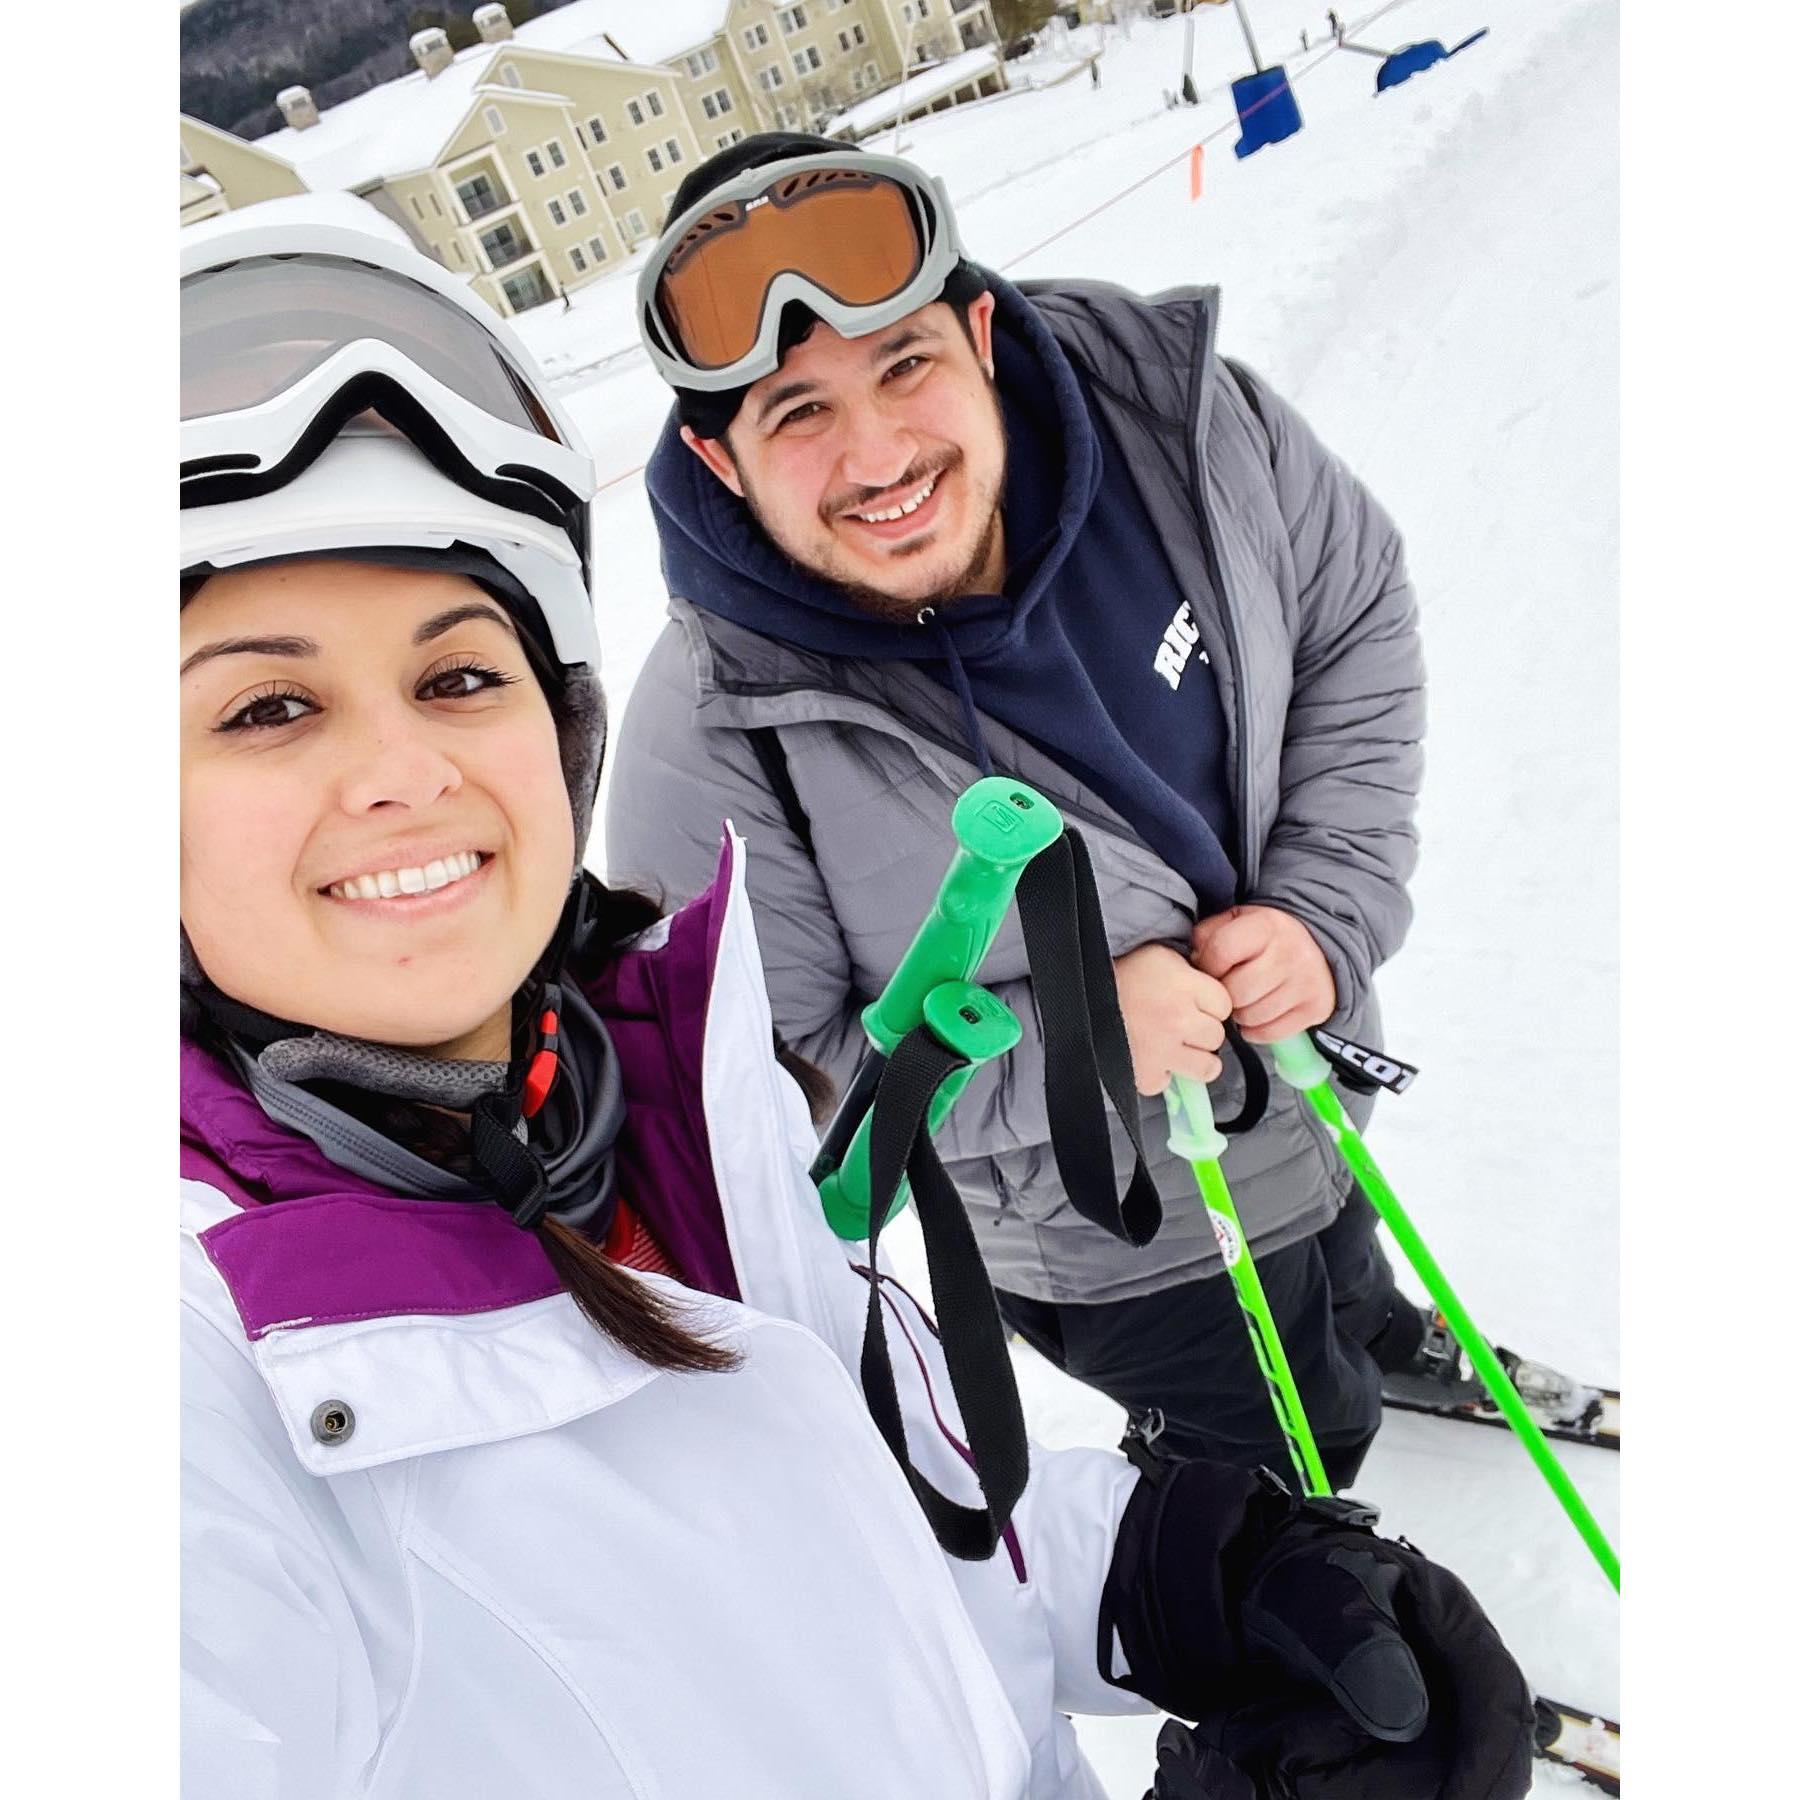 Steph's first time skiing - and no, Mike was NOT her instructor (we probably would not be getting married if he tried to teach her)😂😂